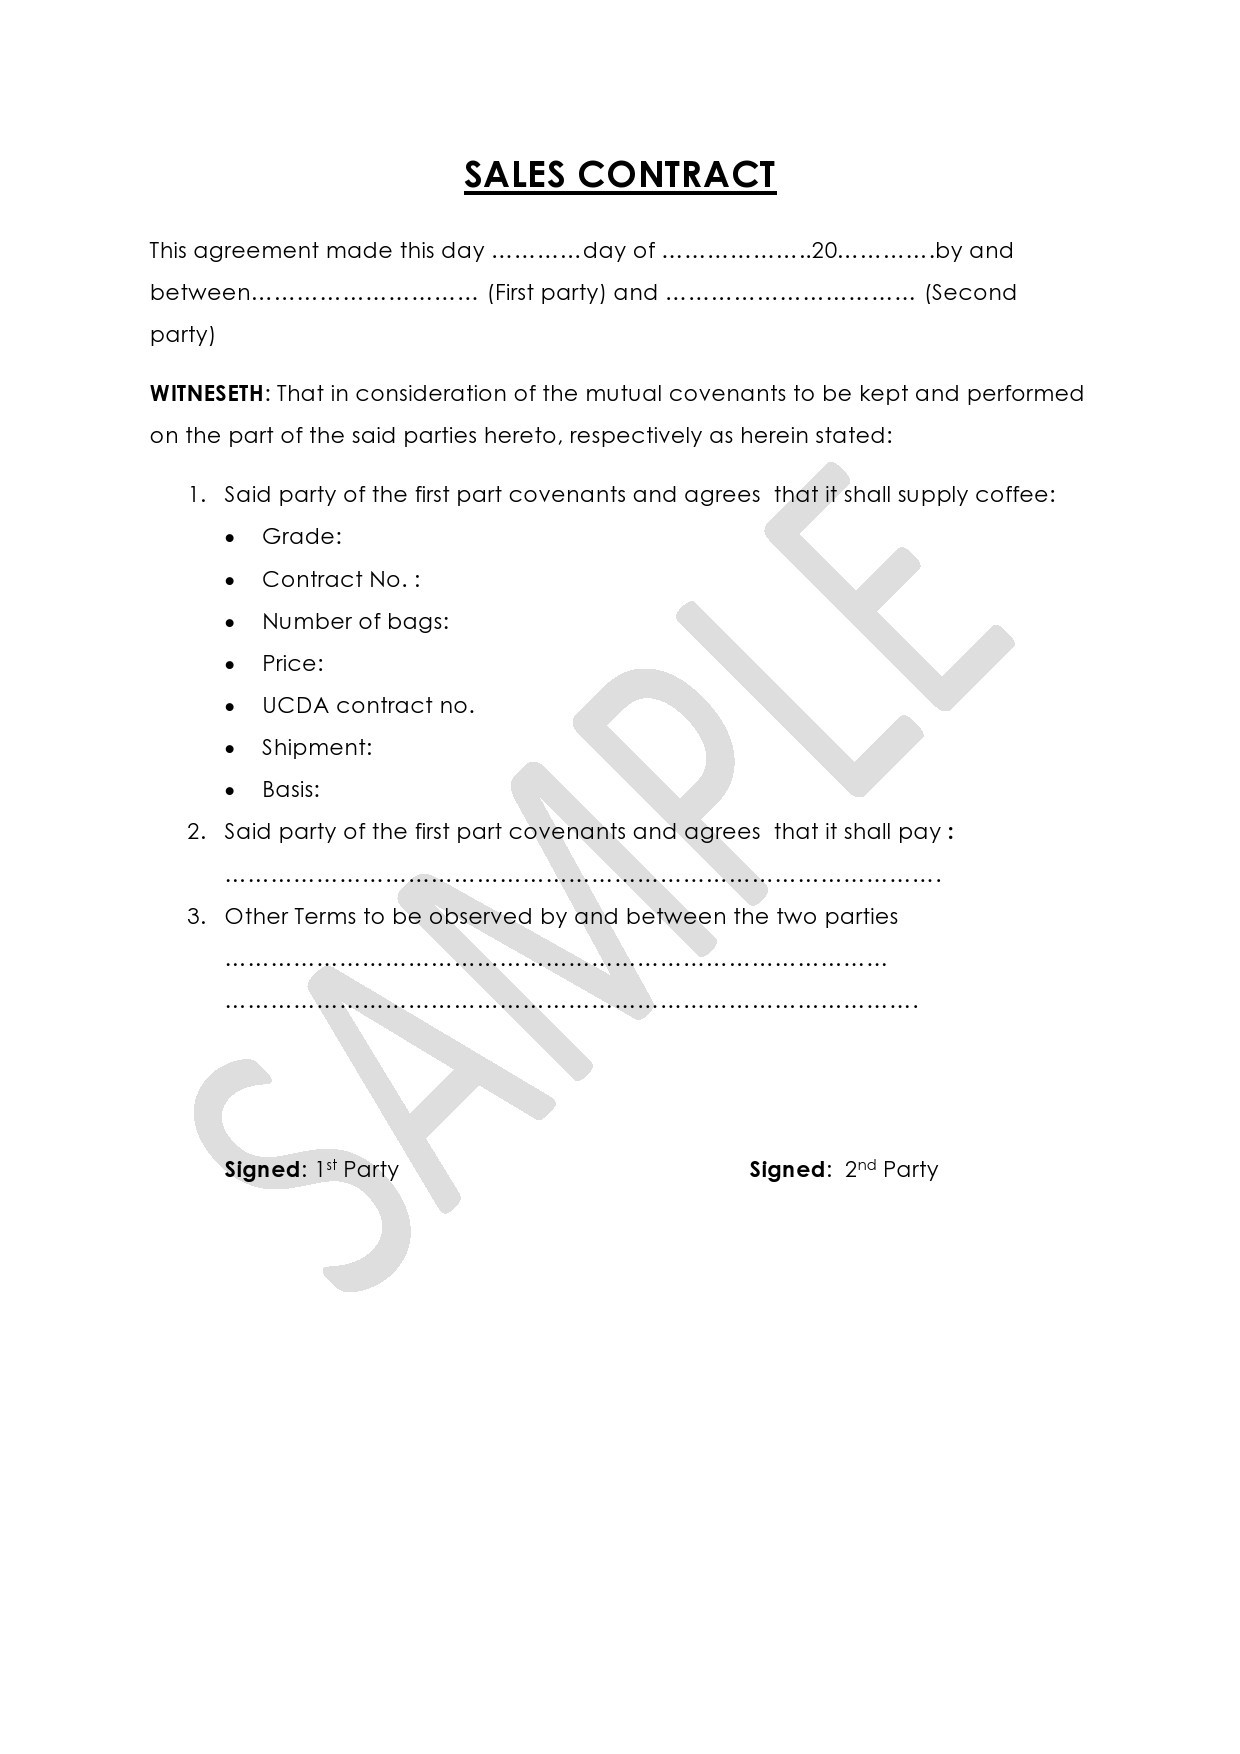 Free sales contract template 09